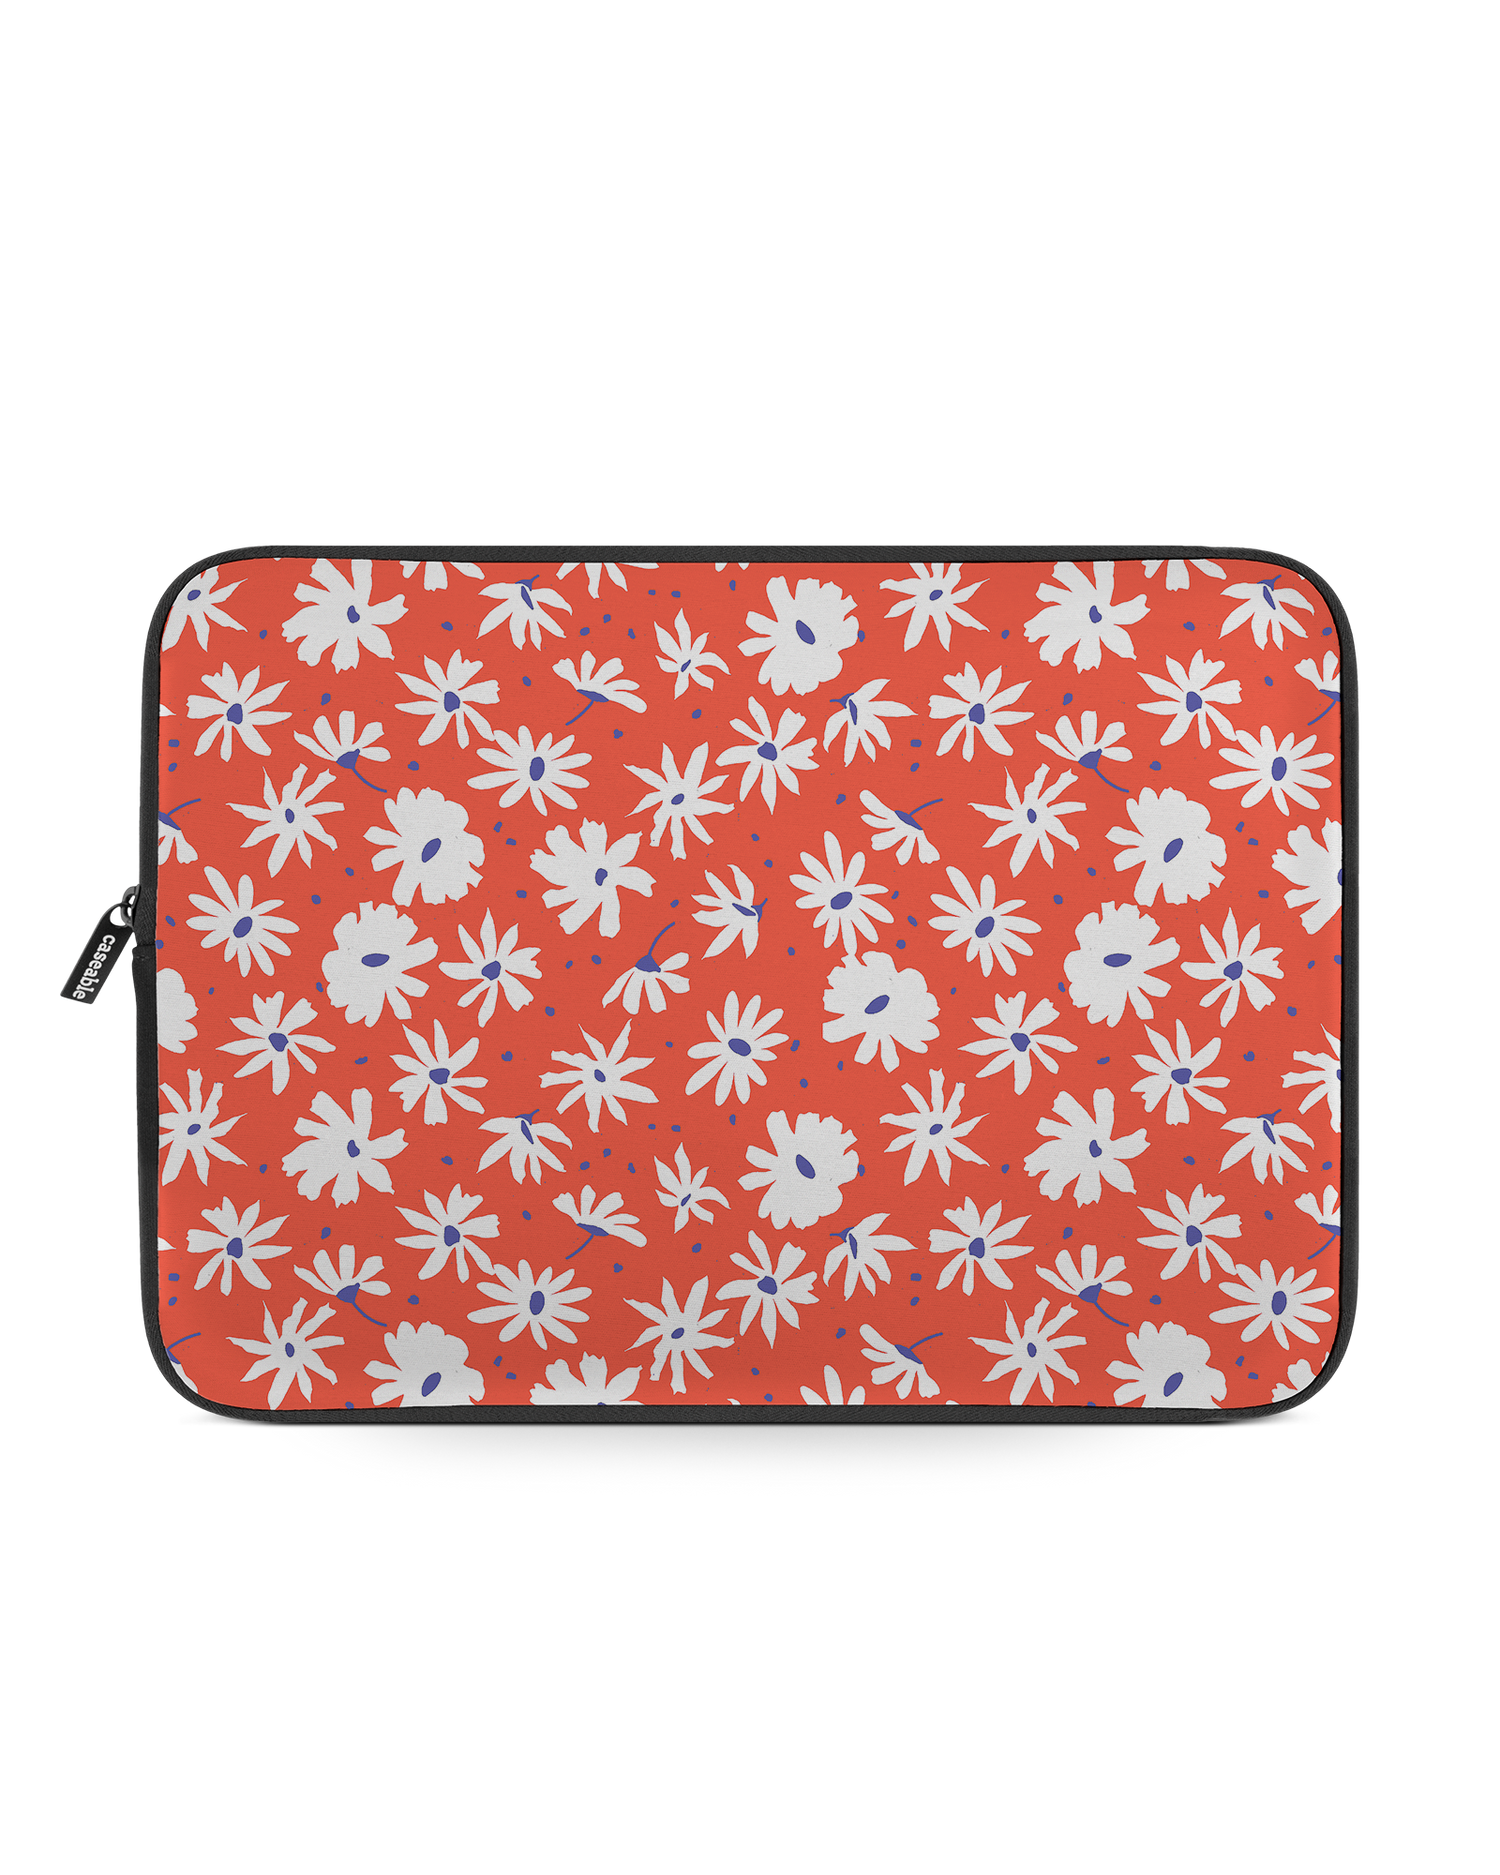 Retro Daisy Laptop Case 13-14 inch: Front View